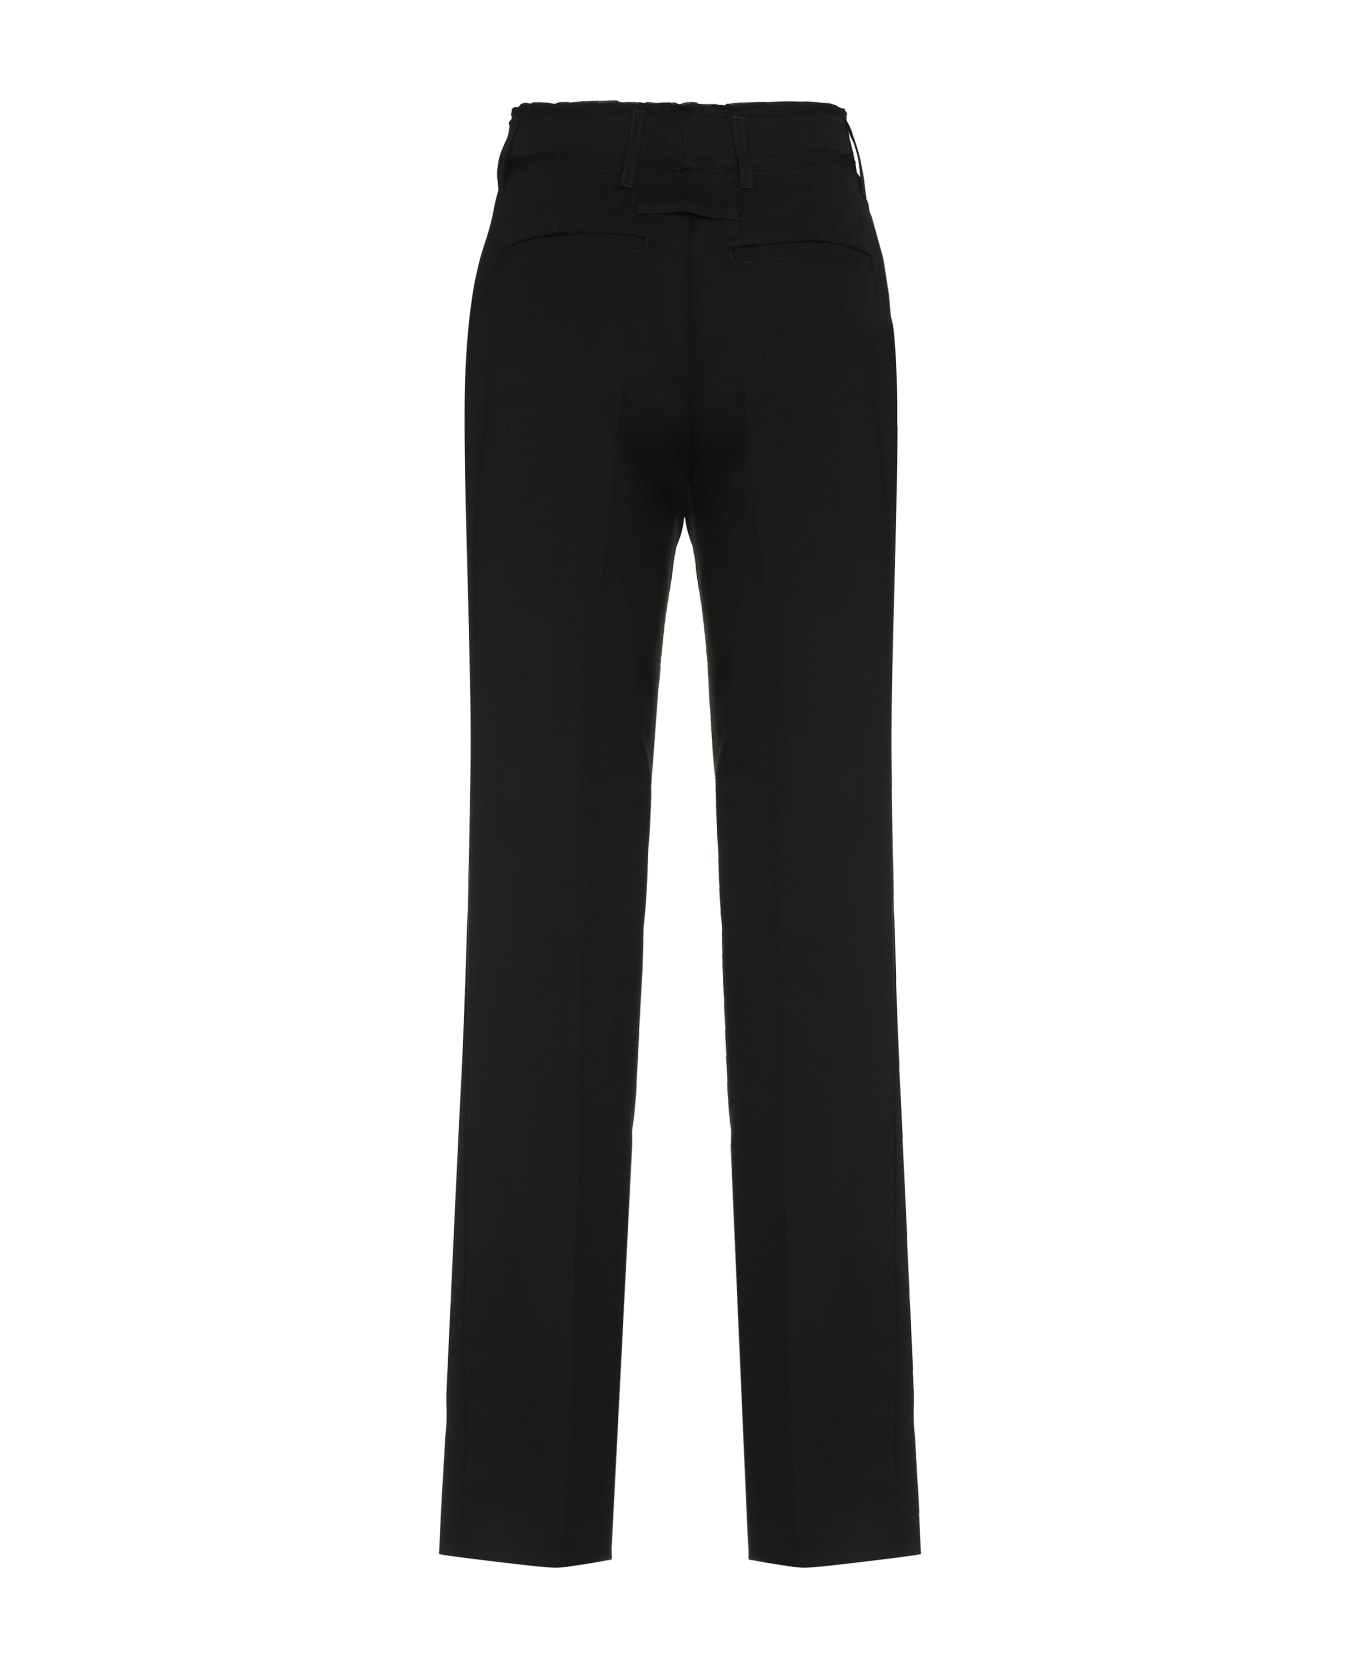 Jacquemus Ficelle Wool Trousers - black ボトムス